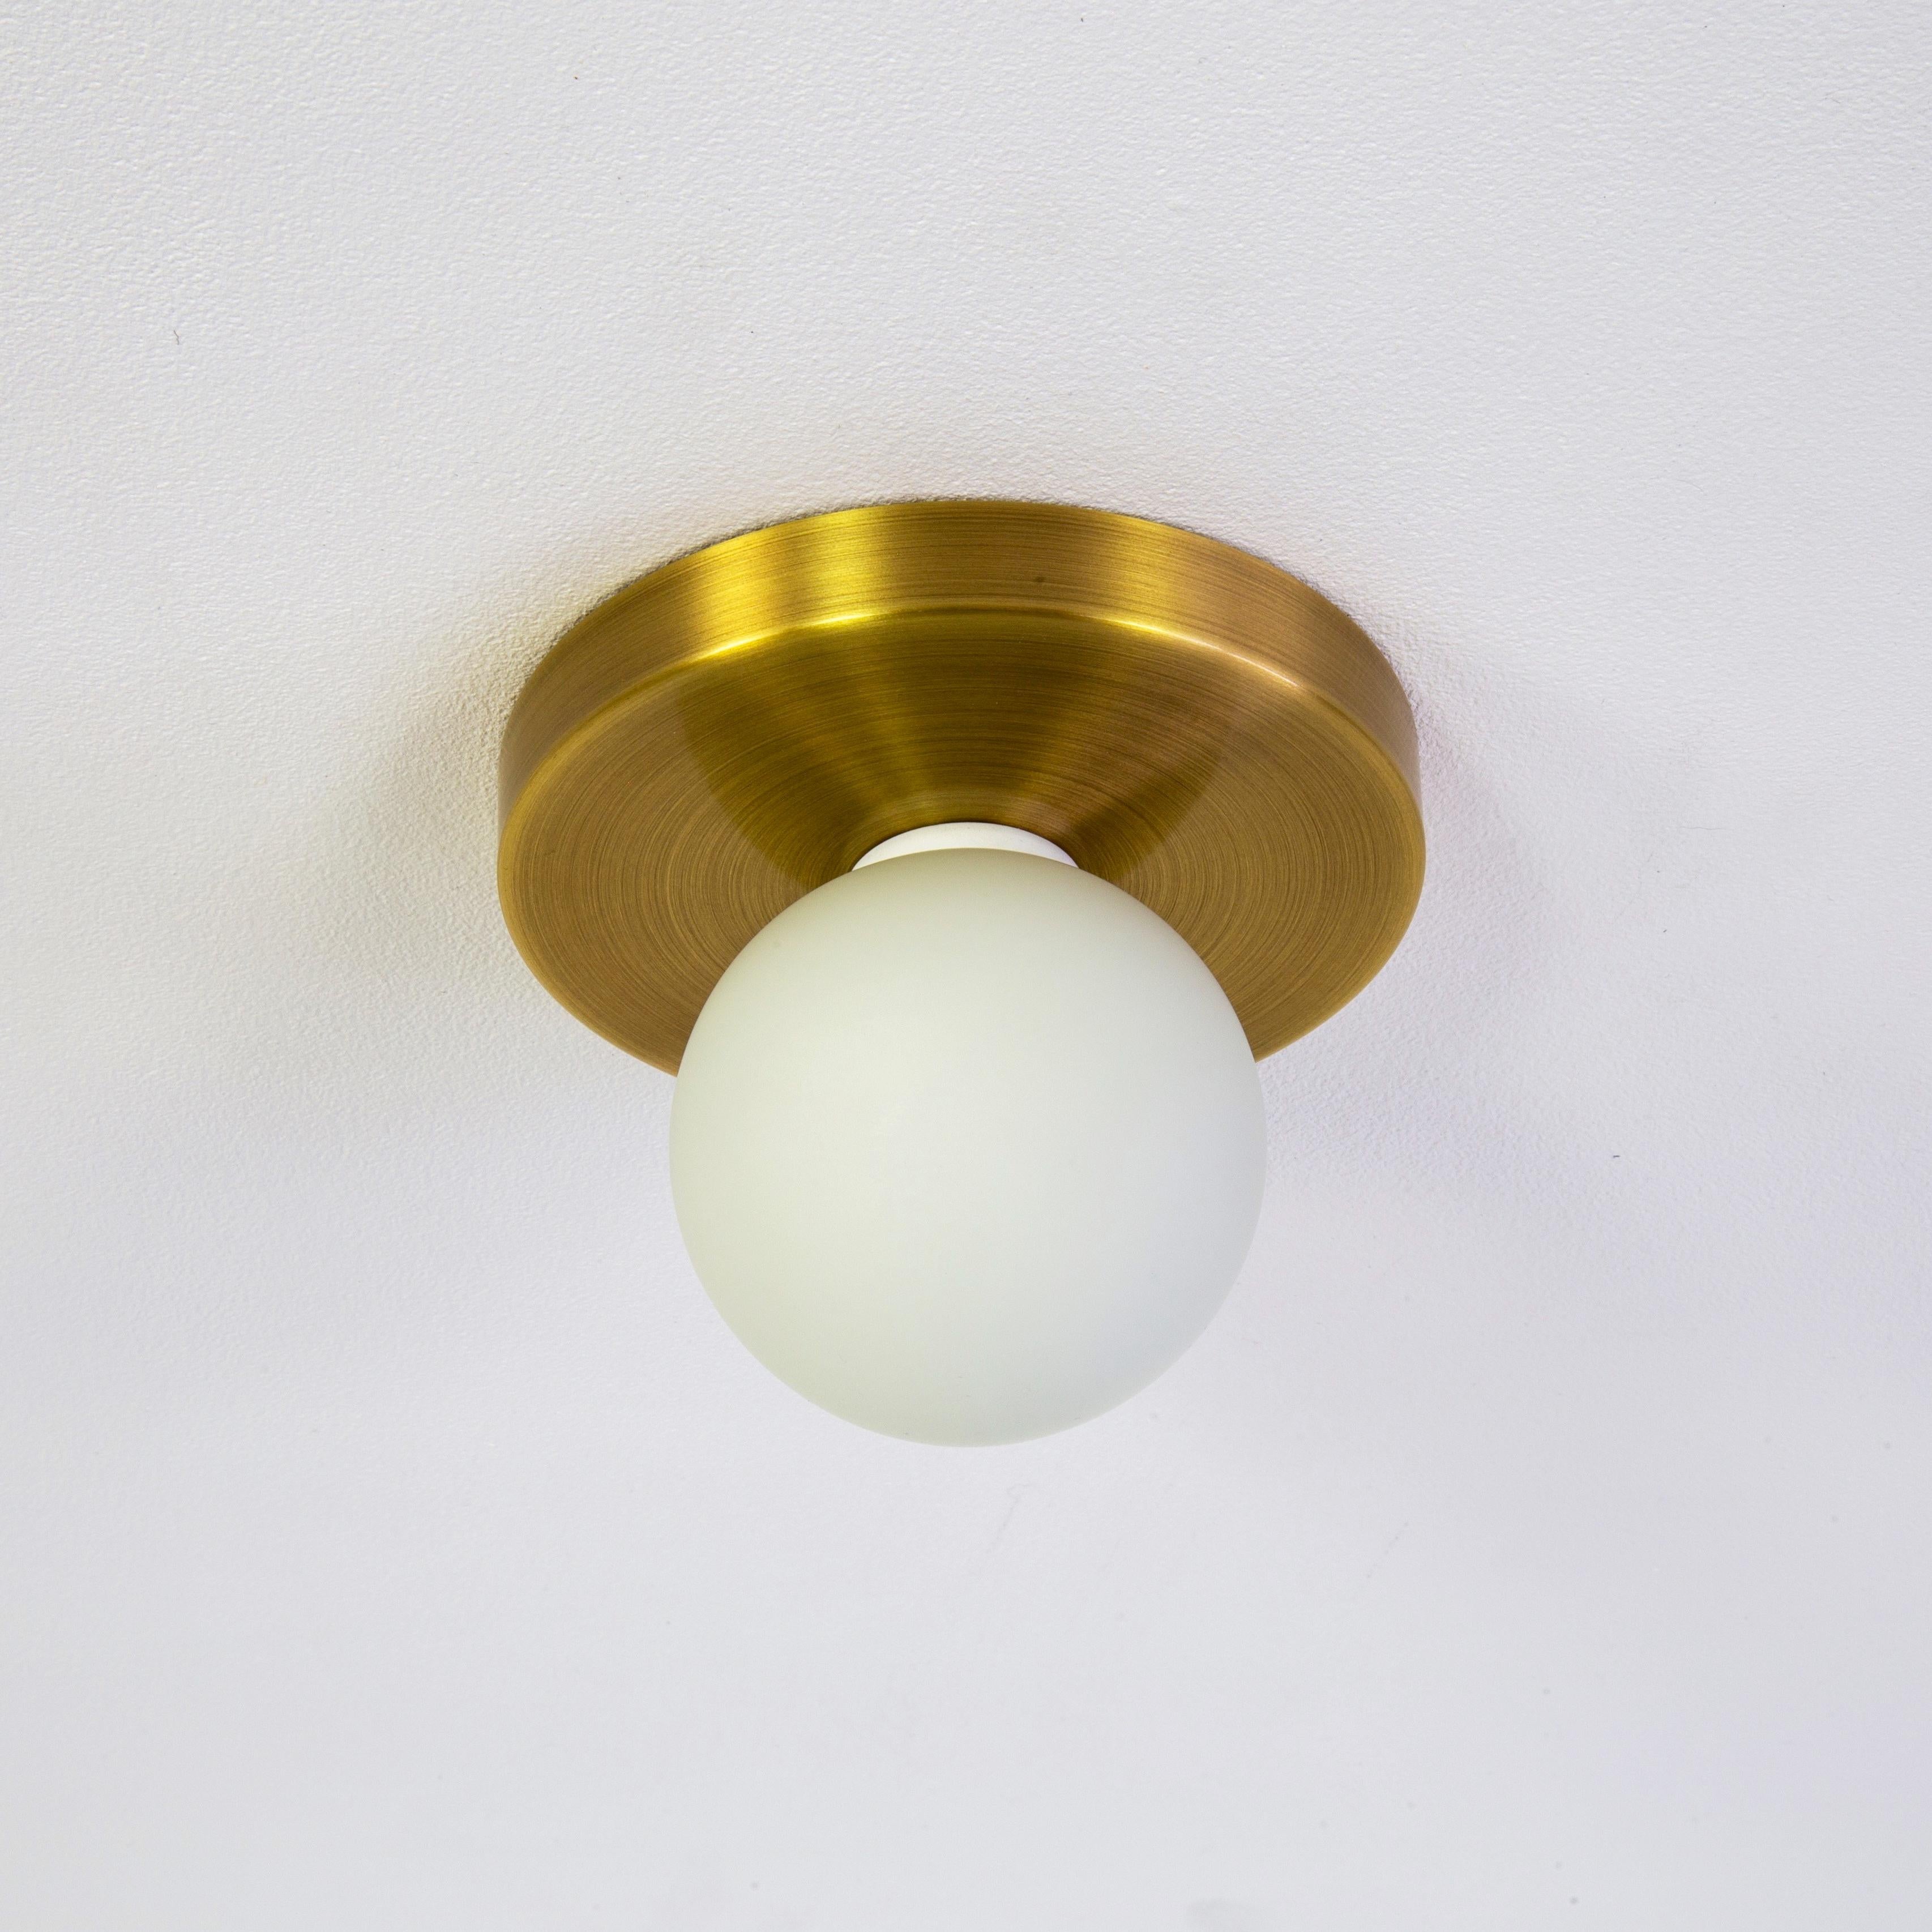 This listing is for 1x Globe Flush Mount in brushed brass designed and manufactured by Research.Lighting.

Materials: Brass, Steel & Glass
Finish: Brushed Brass
Electronics: 1x G9 Socket, 1x 4.5 Watt LED Bulb (included), 450 Lumens
ADA Compliant. UL